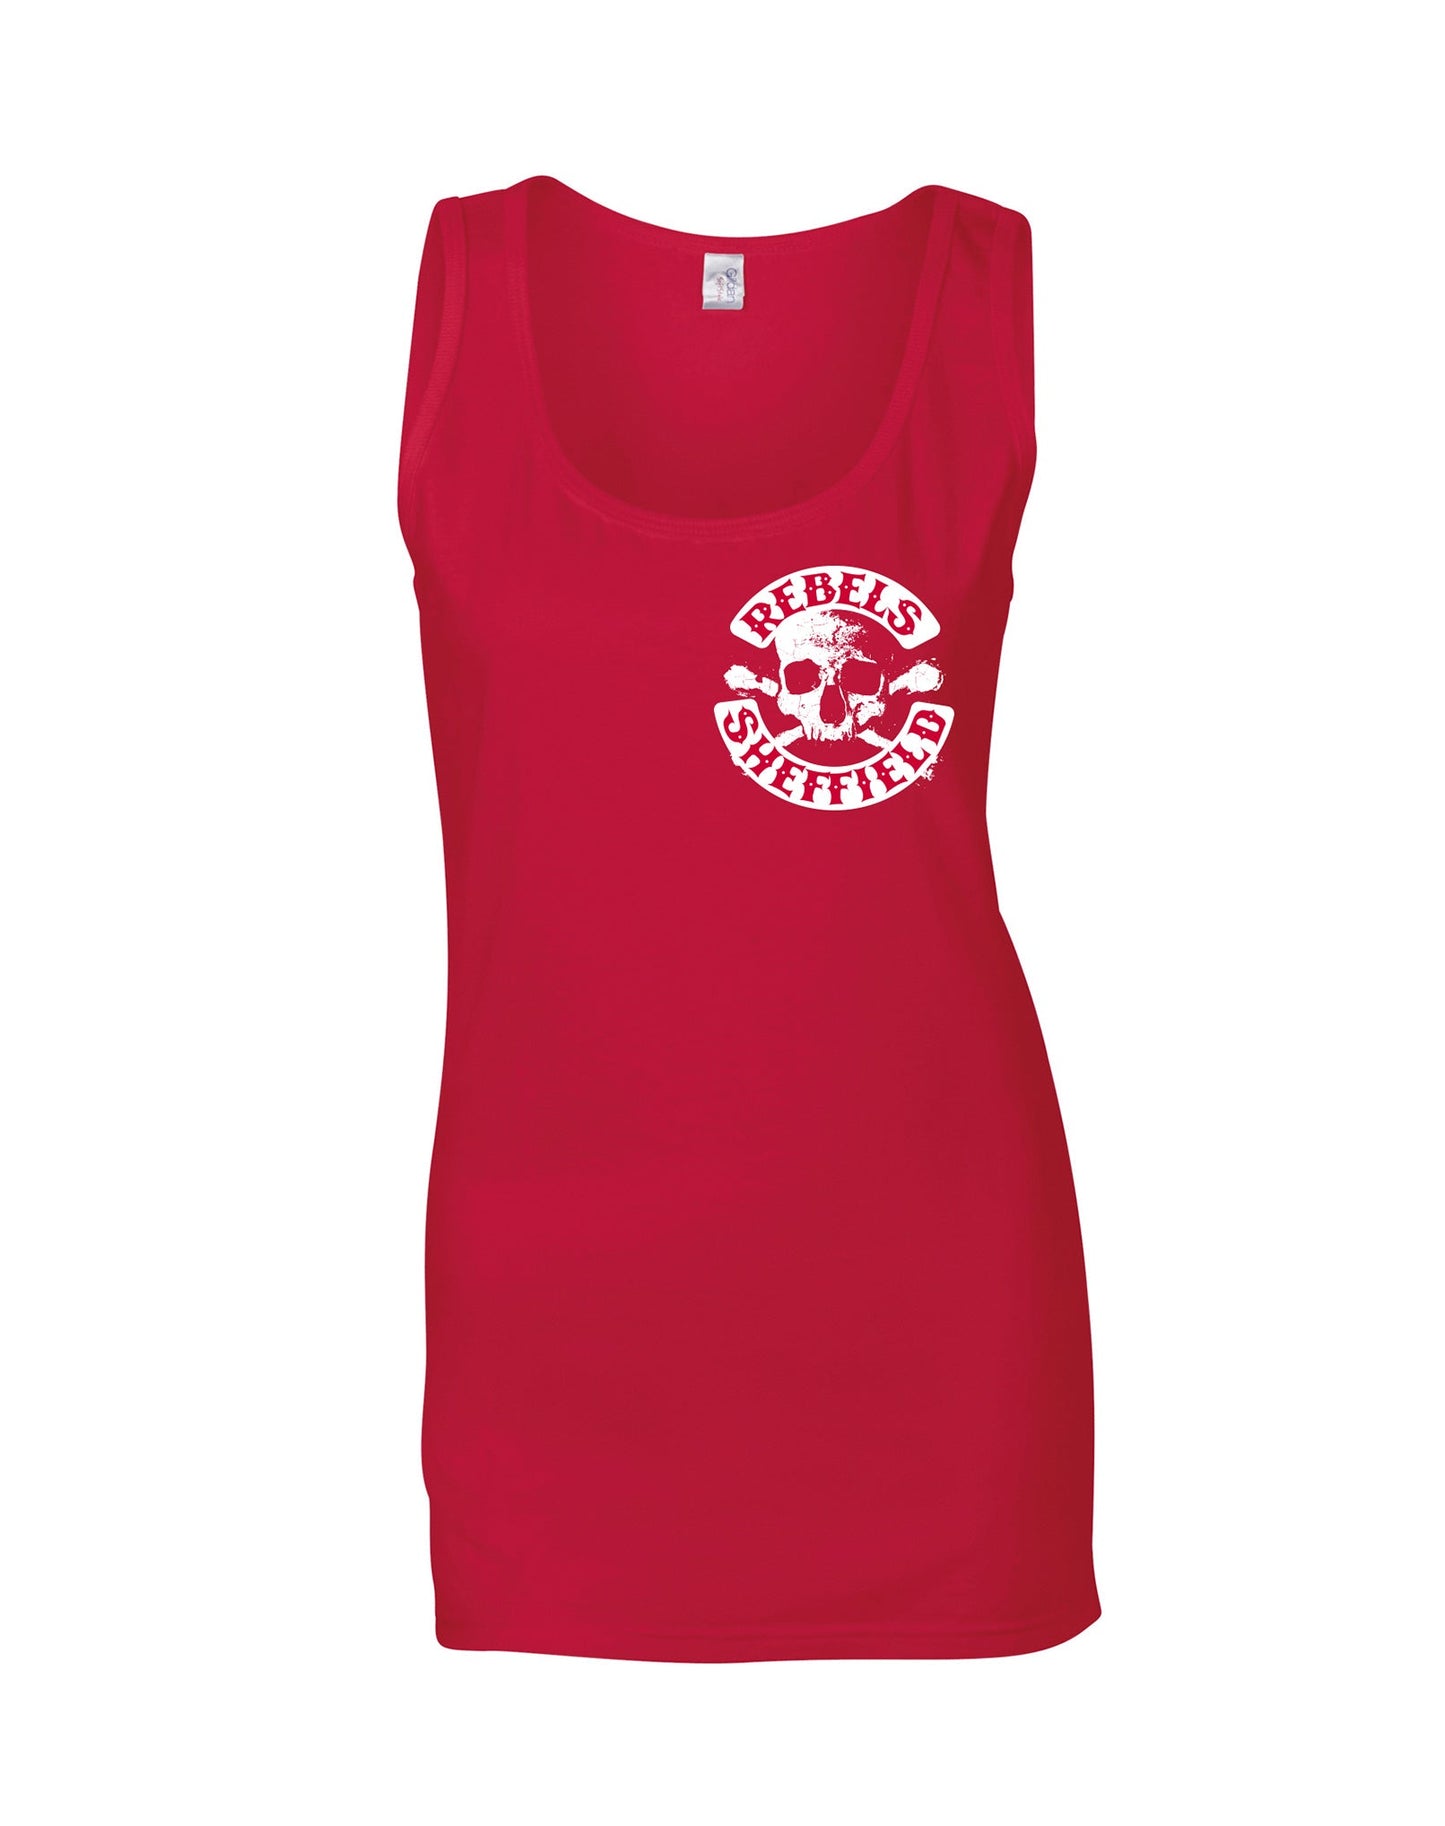 Rebels small skull crossbones ladies fit vest - various colours - Dirty Stop Outs